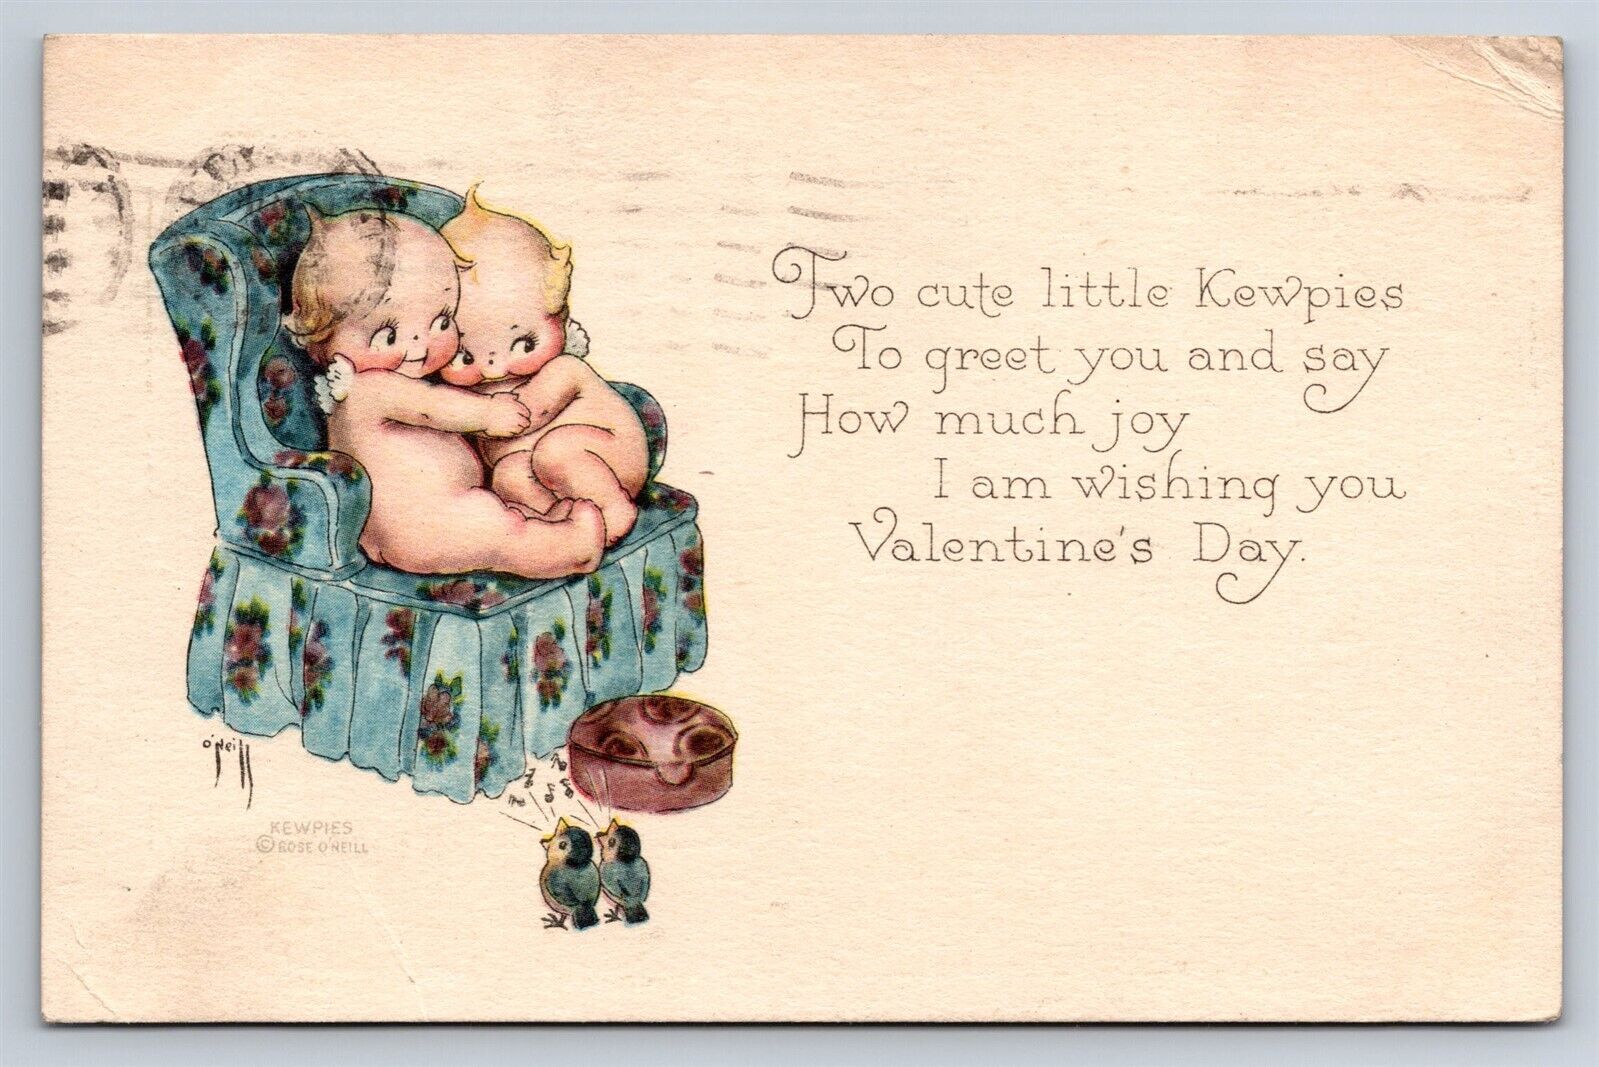 Postcard Valentines Day Rose O'Neill Kewpie Snuggling On Chair c1920s AD26